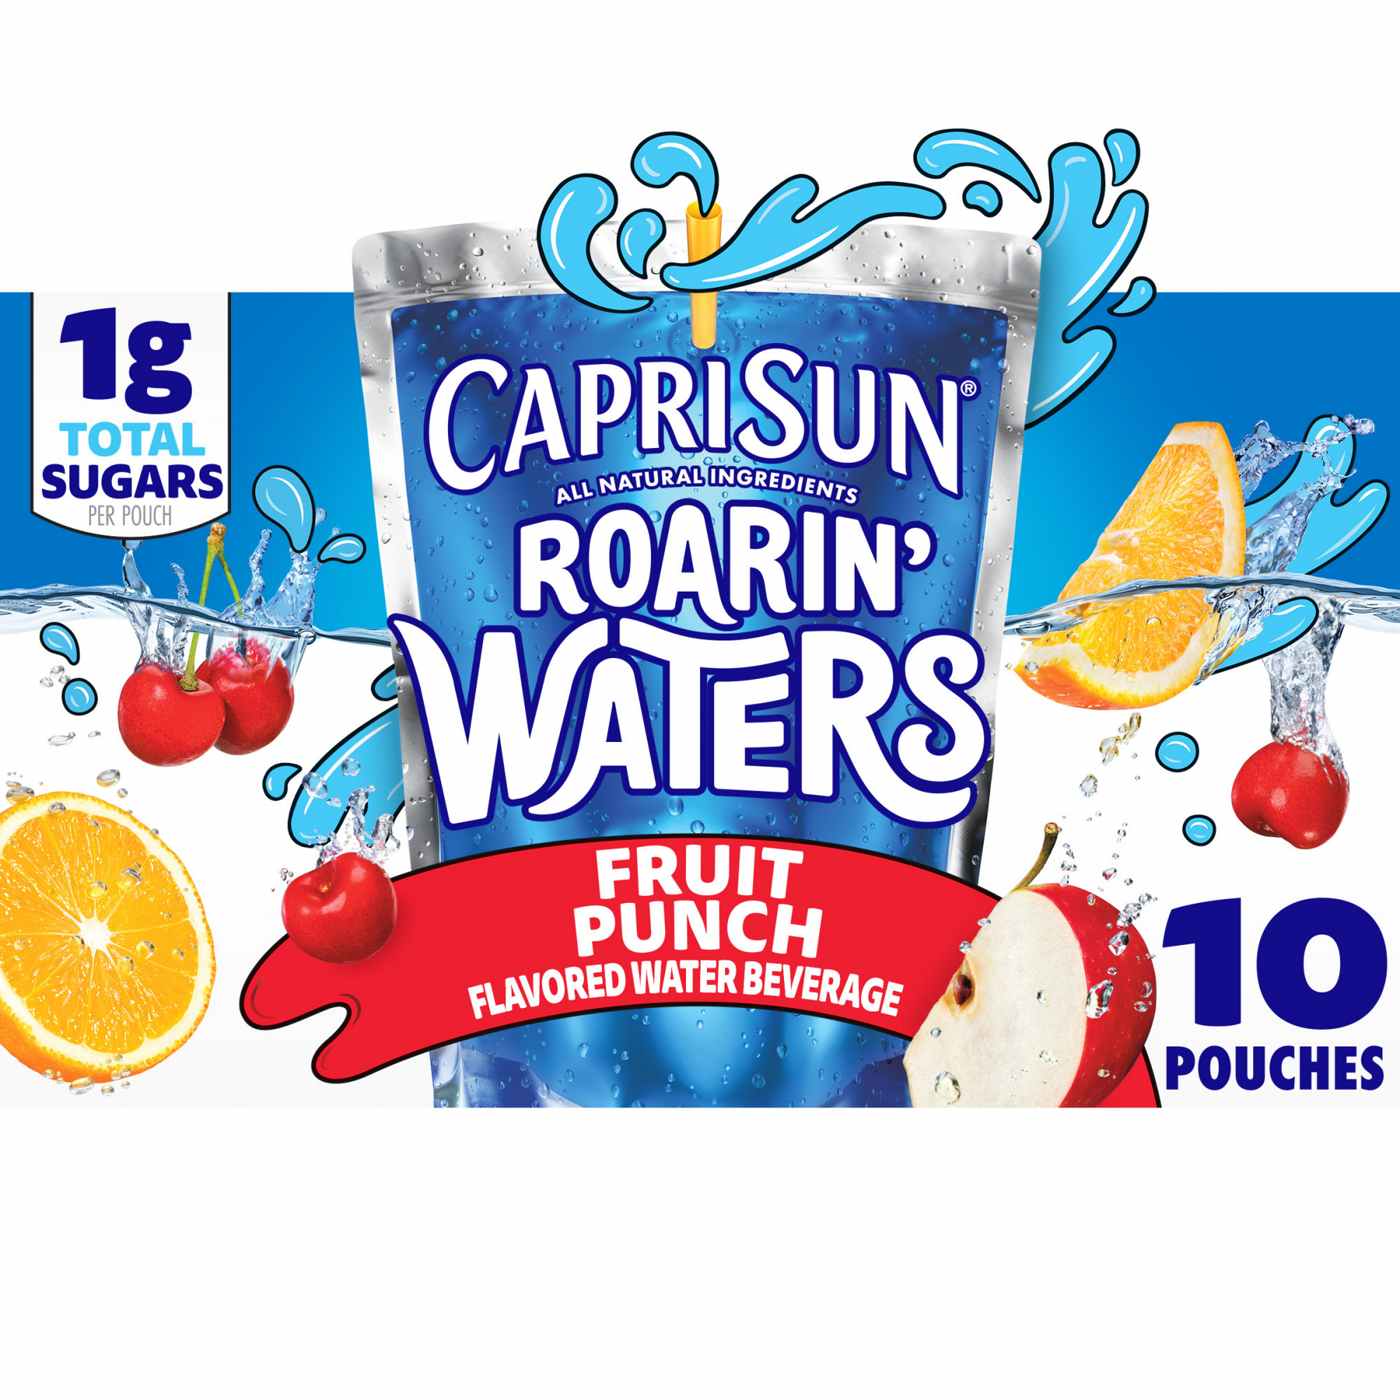 Capri Sun Roarin' Waters Fruit Punch Flavored Water Beverage 6 oz Pouches; image 1 of 7